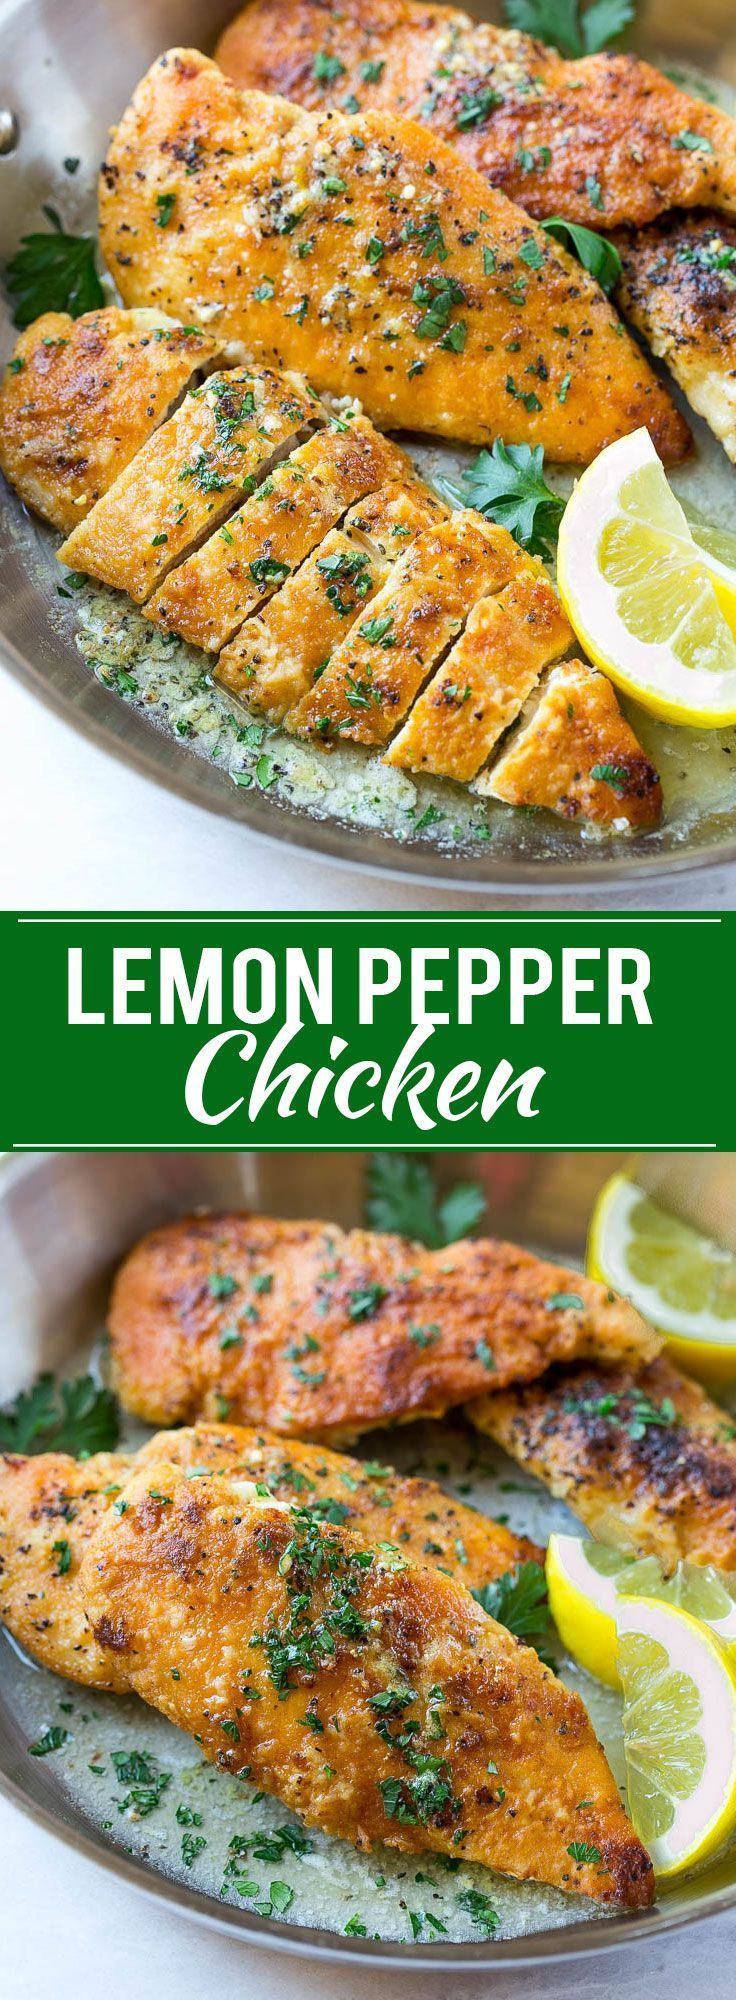 This recipe for lemon pepper chicken with butter sauce is a simple recipe that’s ready in just 20 minutes! The perfect dinner for